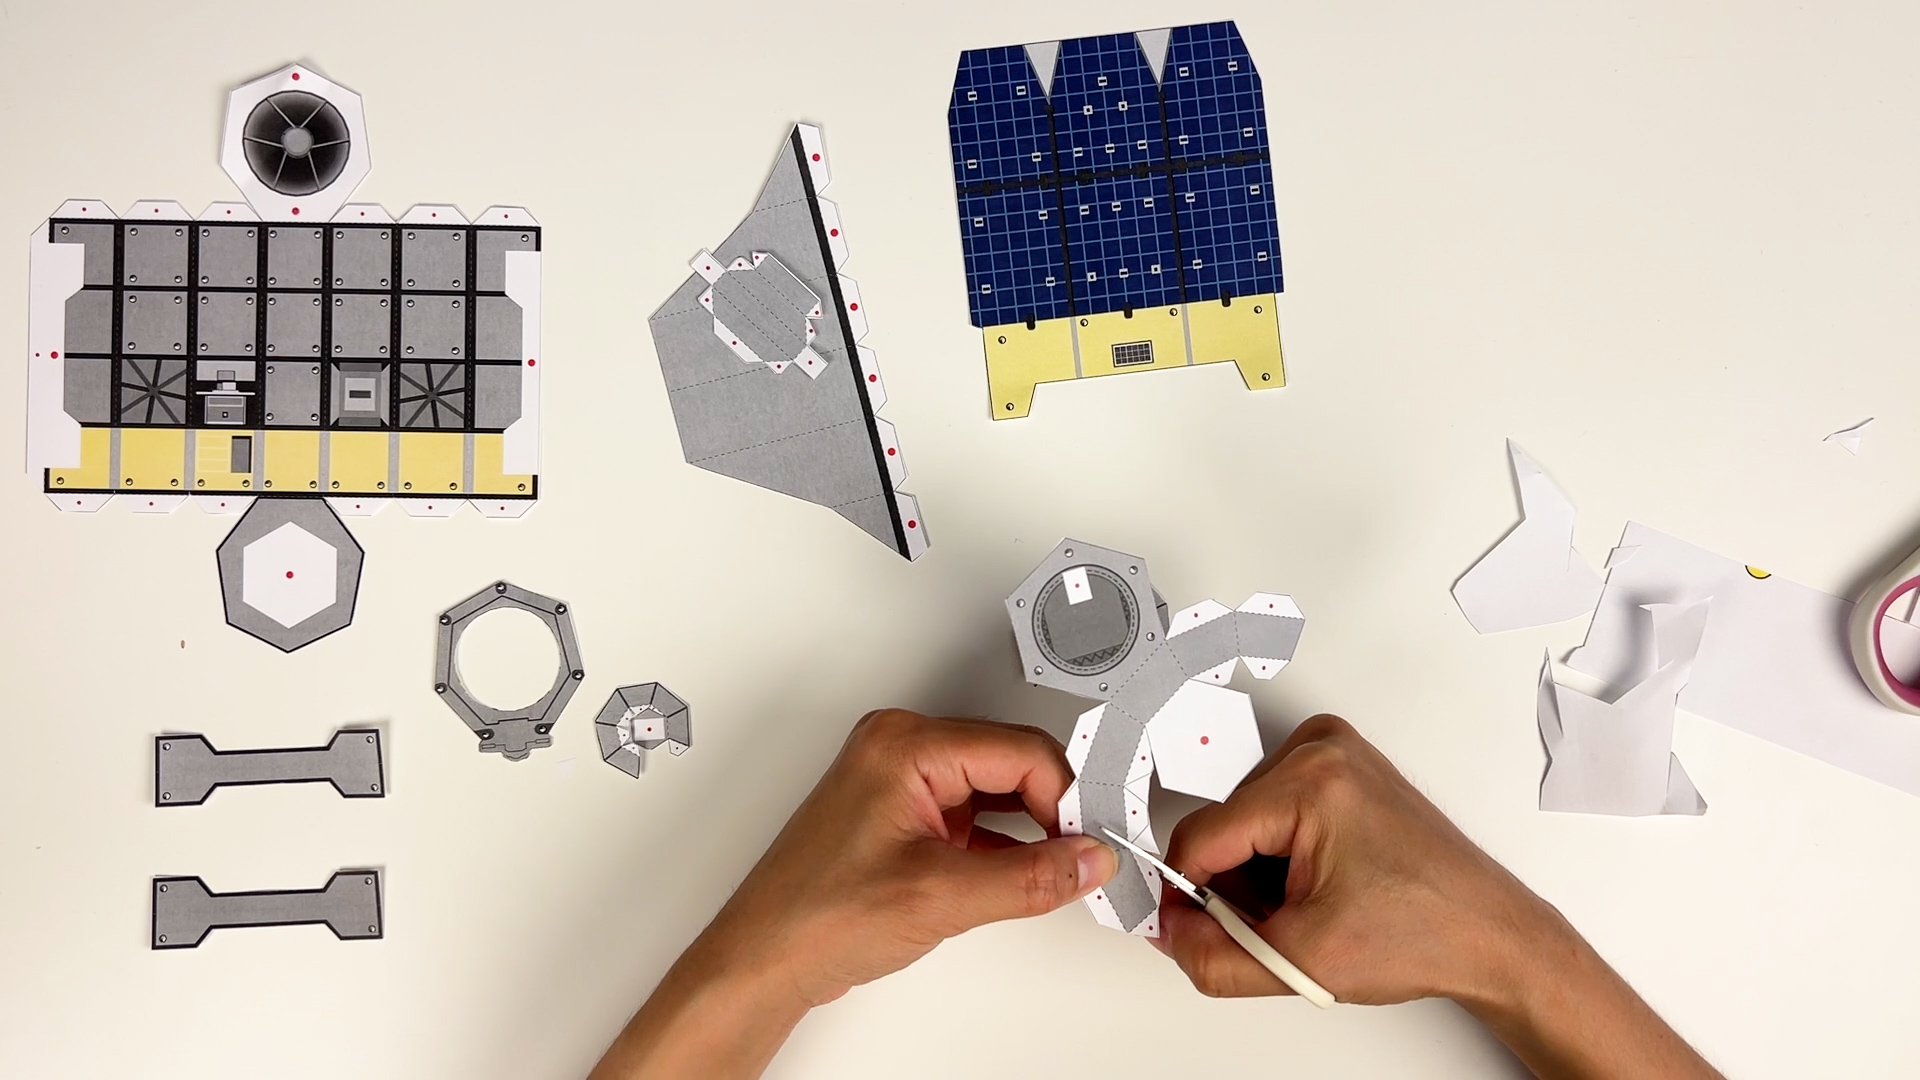 Building paper models of spacecraft is a fun, interactive way to learn more about NASA's missions. Watch this video to see how NASA's Nancy Grace Roman Space Telescope paper model comes together, then try making your own. (If you like this project, you can explore making models of other NASA spacecraft here:  https://go.nasa.gov/papermodels.)Credit: NASA's Goddard Space Flight Center/Origami TreeMusic: "Digital Dreamscape" from Universal Production MusicWatch this video on the NASA.gov Video YouTube channel.Complete transcript available.